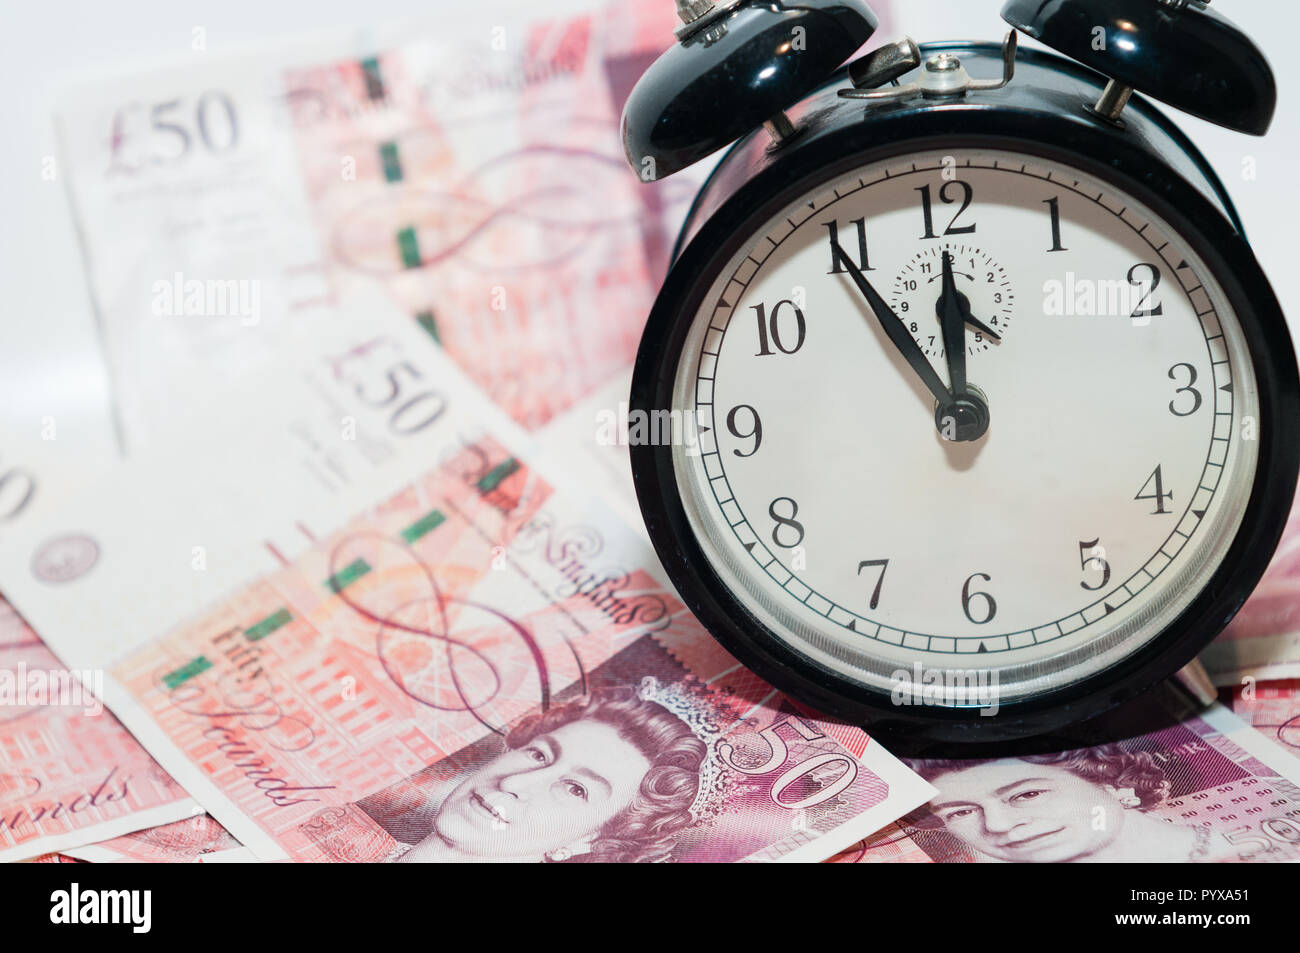 UK currency, 50 pounds Stock Photo